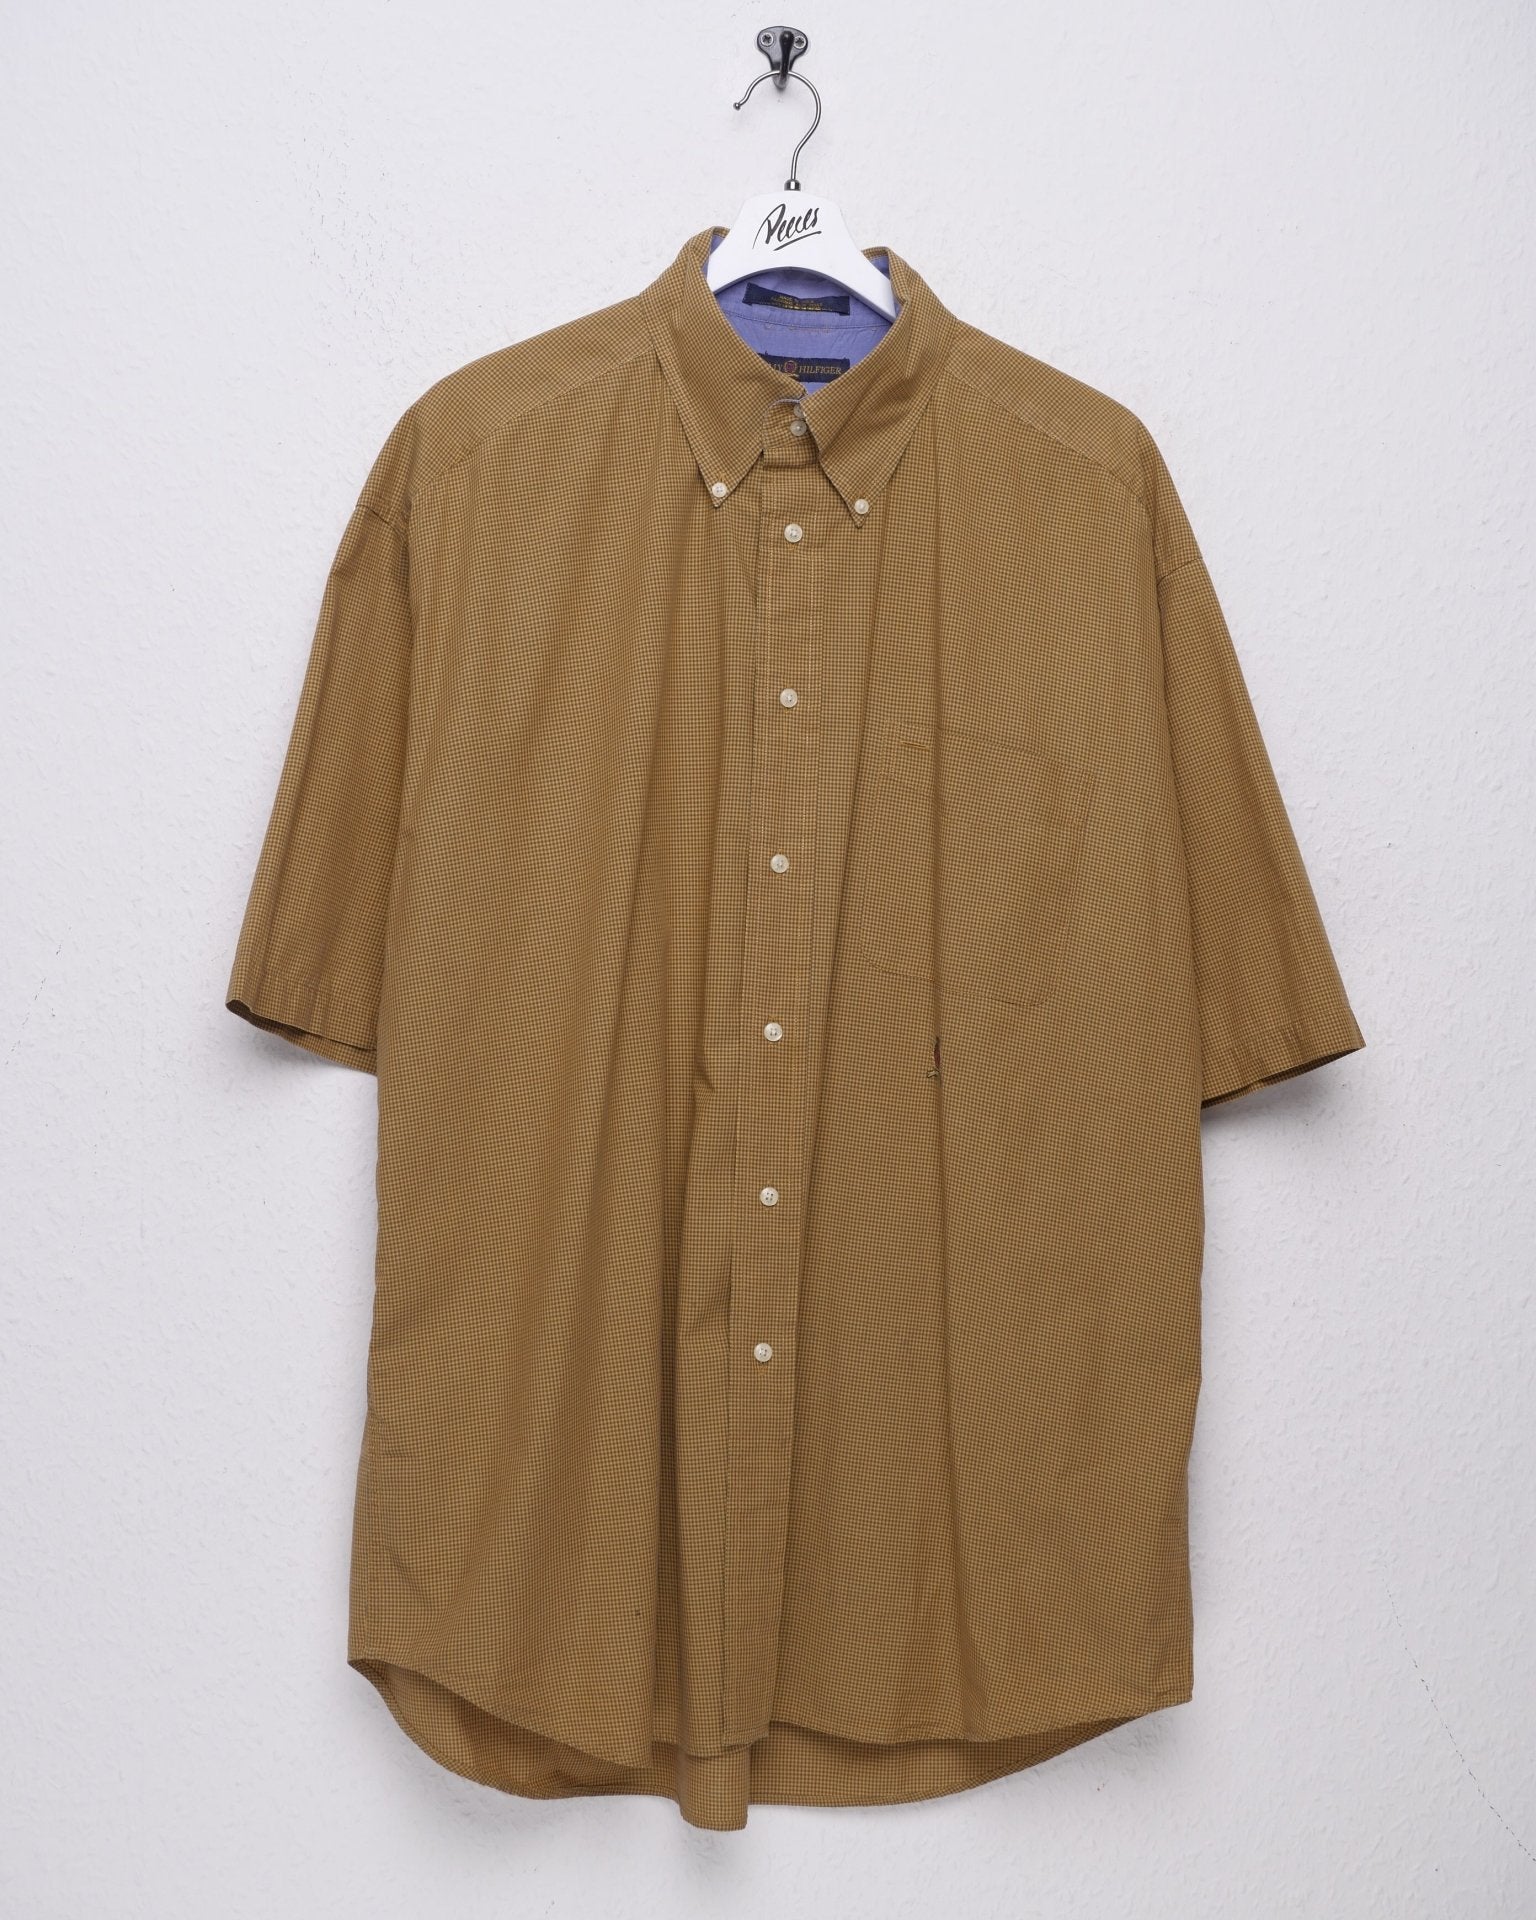 Tommy Hilfiger embroidered Logo Button Down S/S Shirt - Peeces